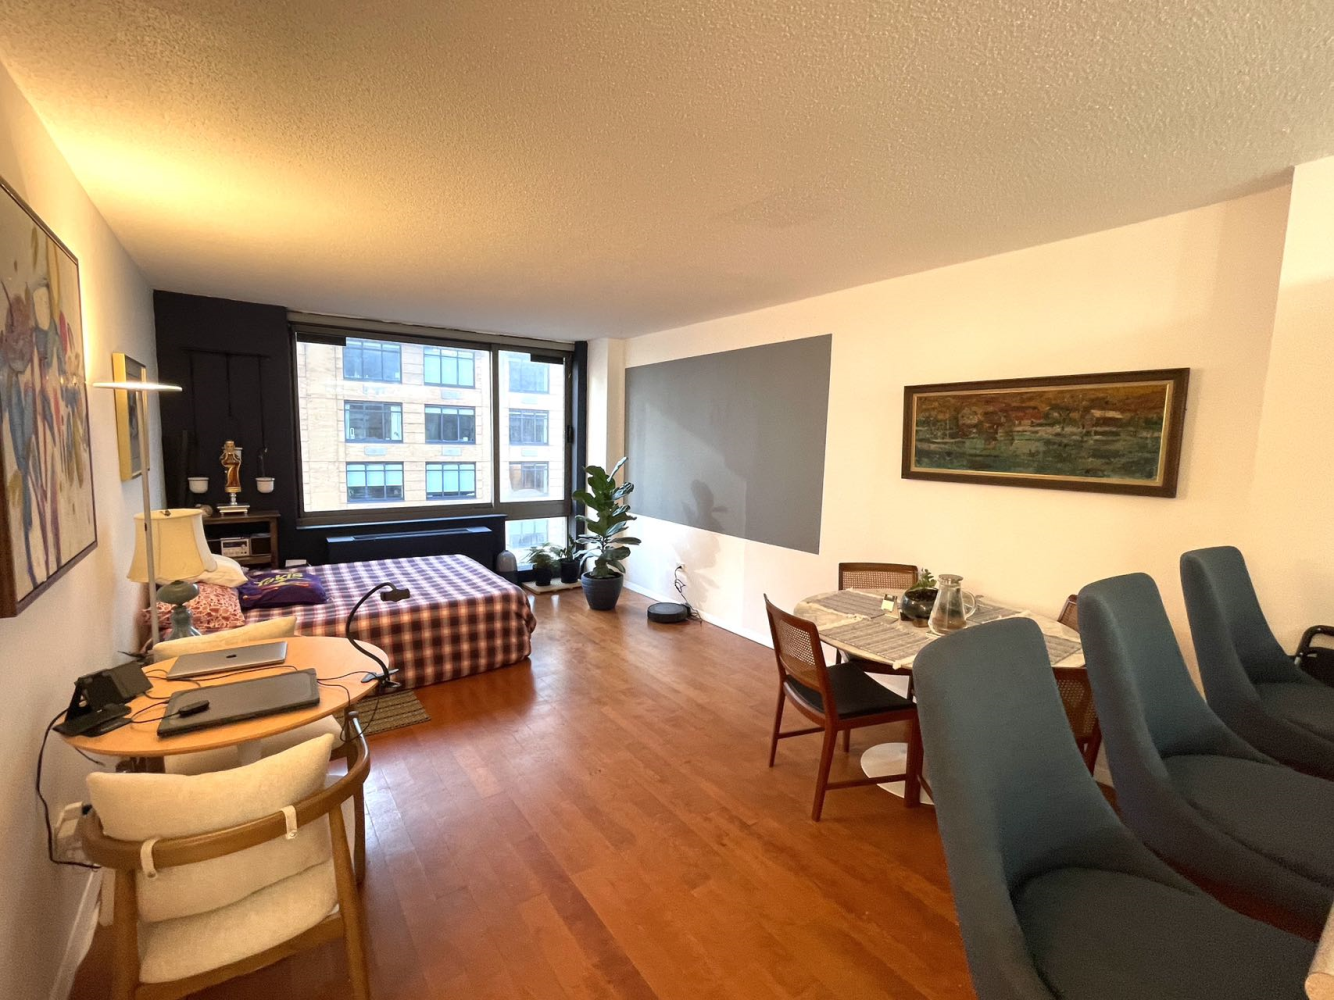 2 South End Avenue 7J, Battery Park City, Downtown, NYC - 1 Bedrooms  
1 Bathrooms  
3 Rooms - 